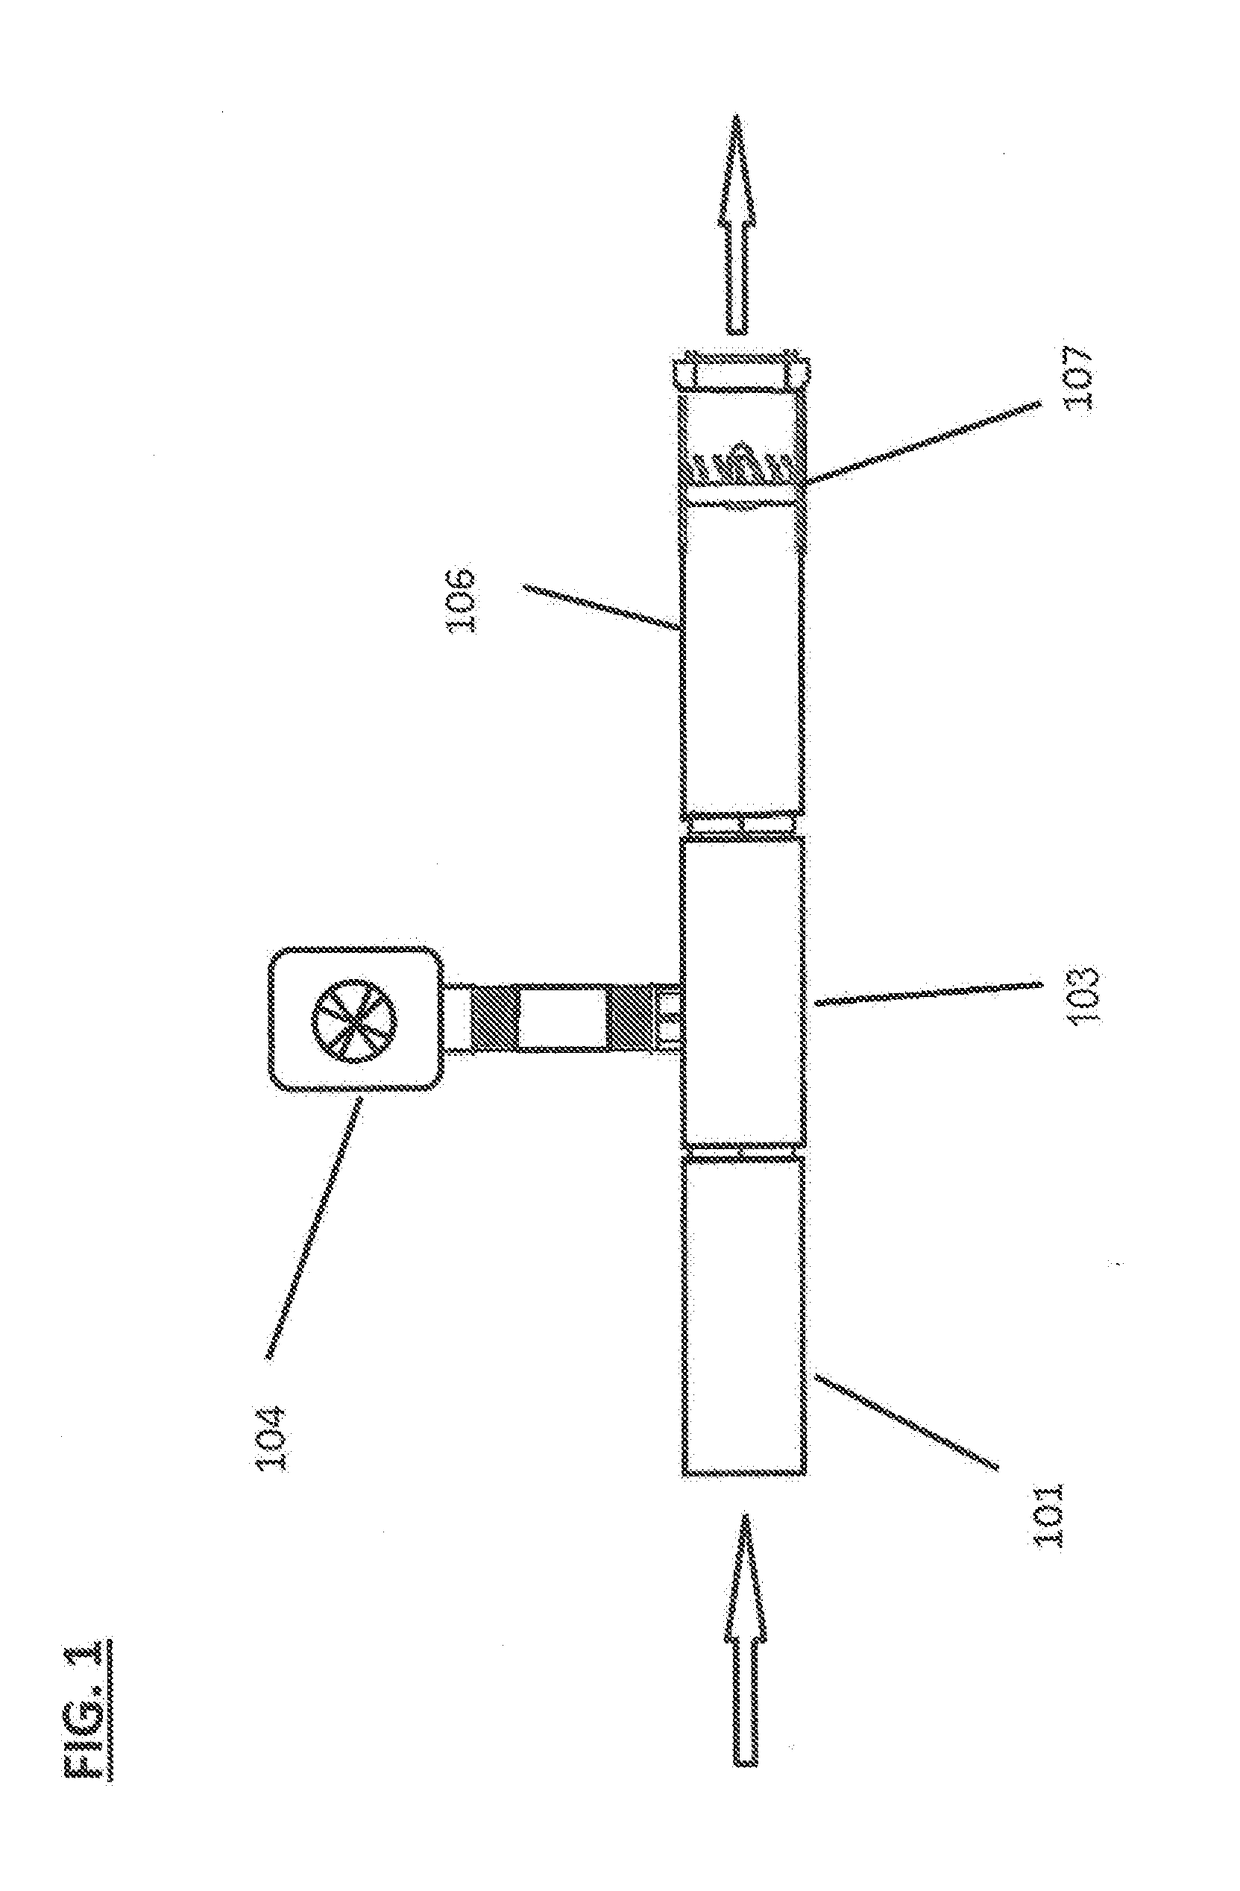 Gas infusion systems for liquids and methods of using the same